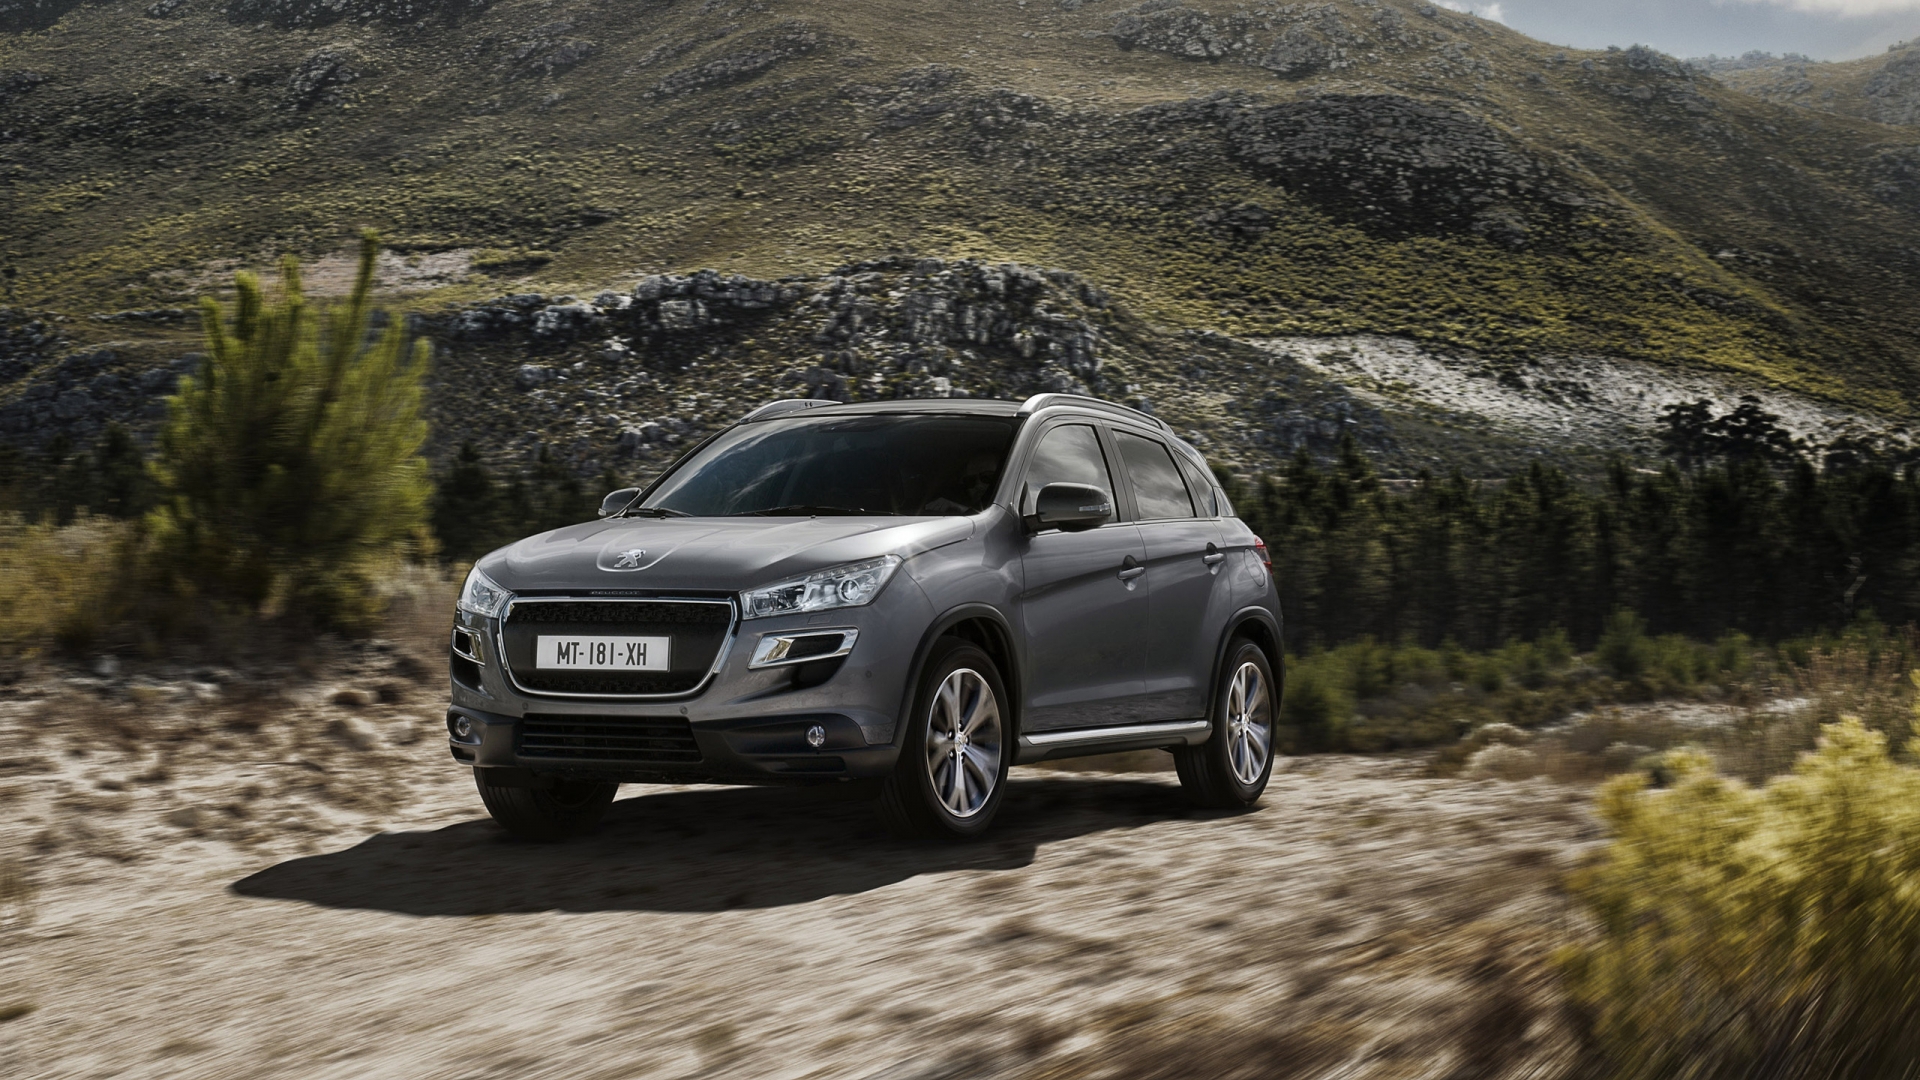 Beautiful Peugeot 4008 4x4 for 1920 x 1080 HDTV 1080p resolution